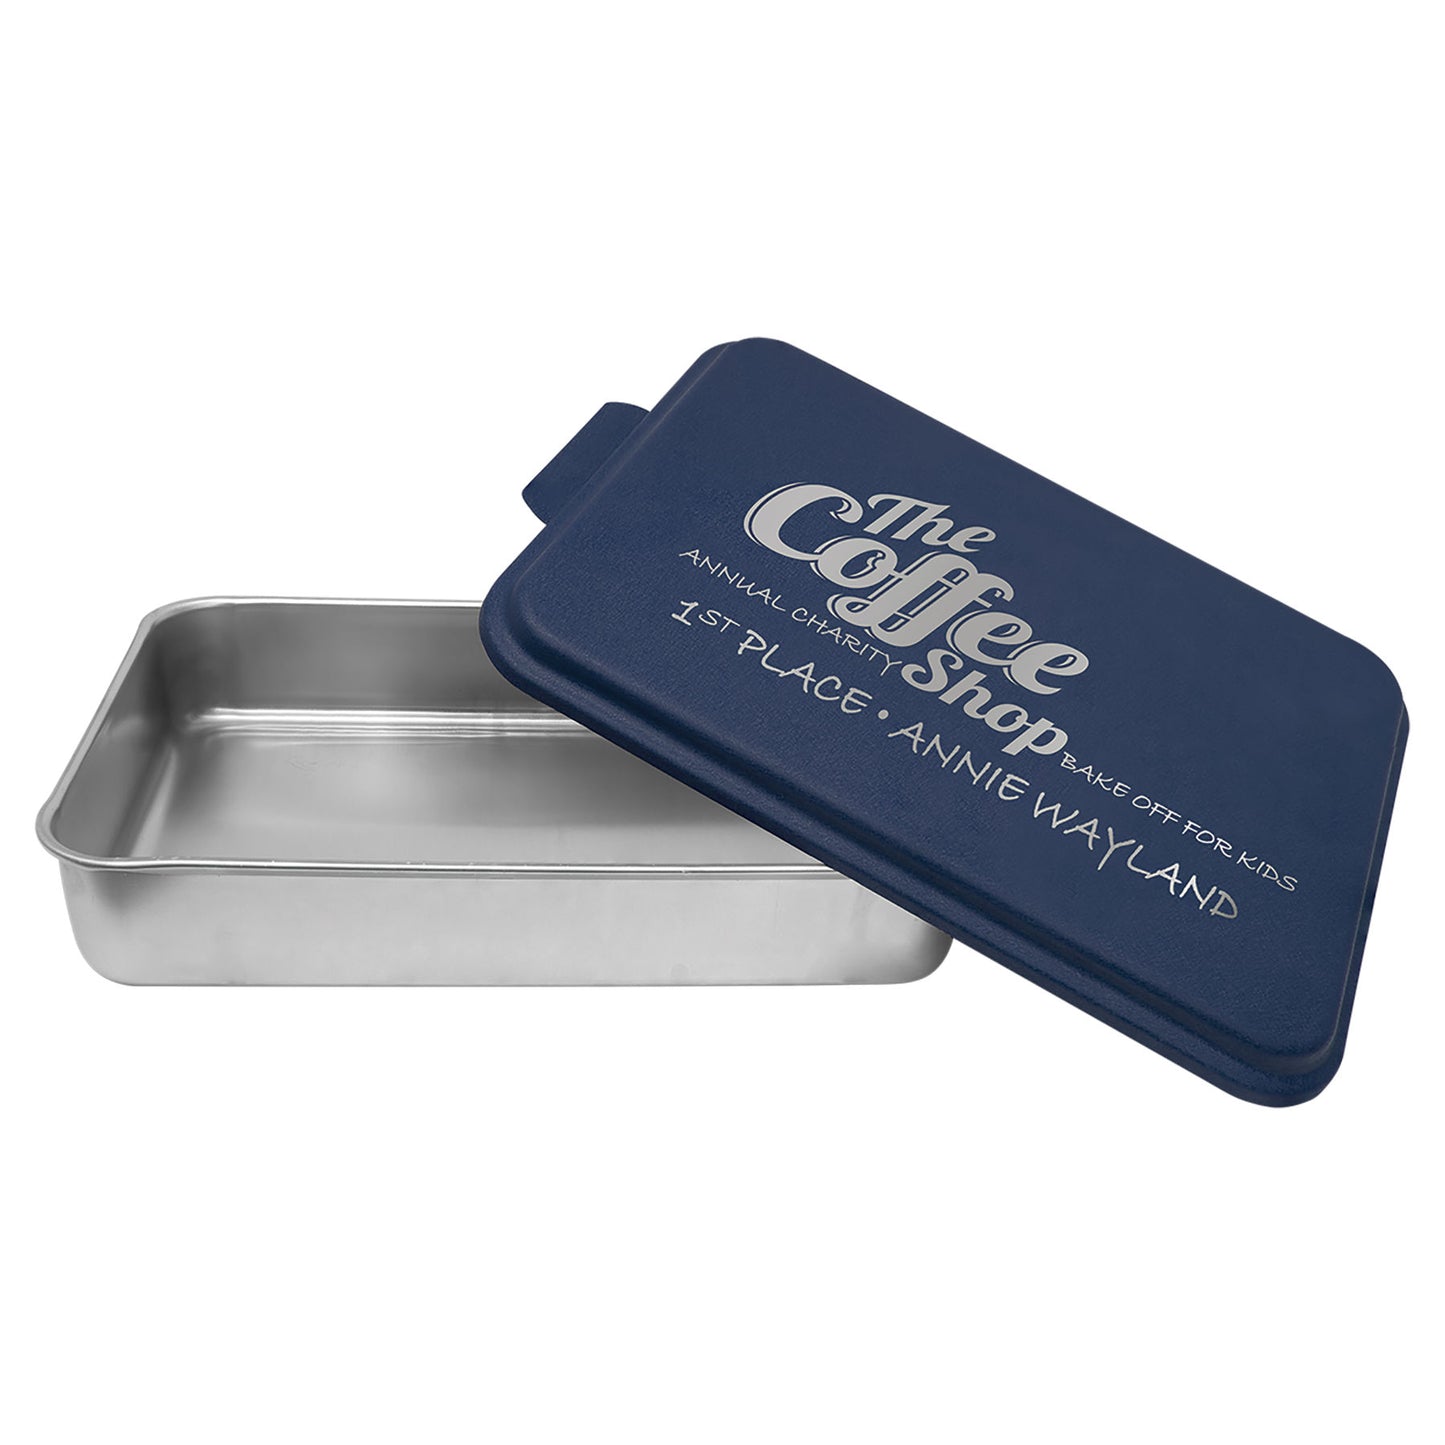 Aluminum Cake Pan with Personalized Powder-Coated Lid